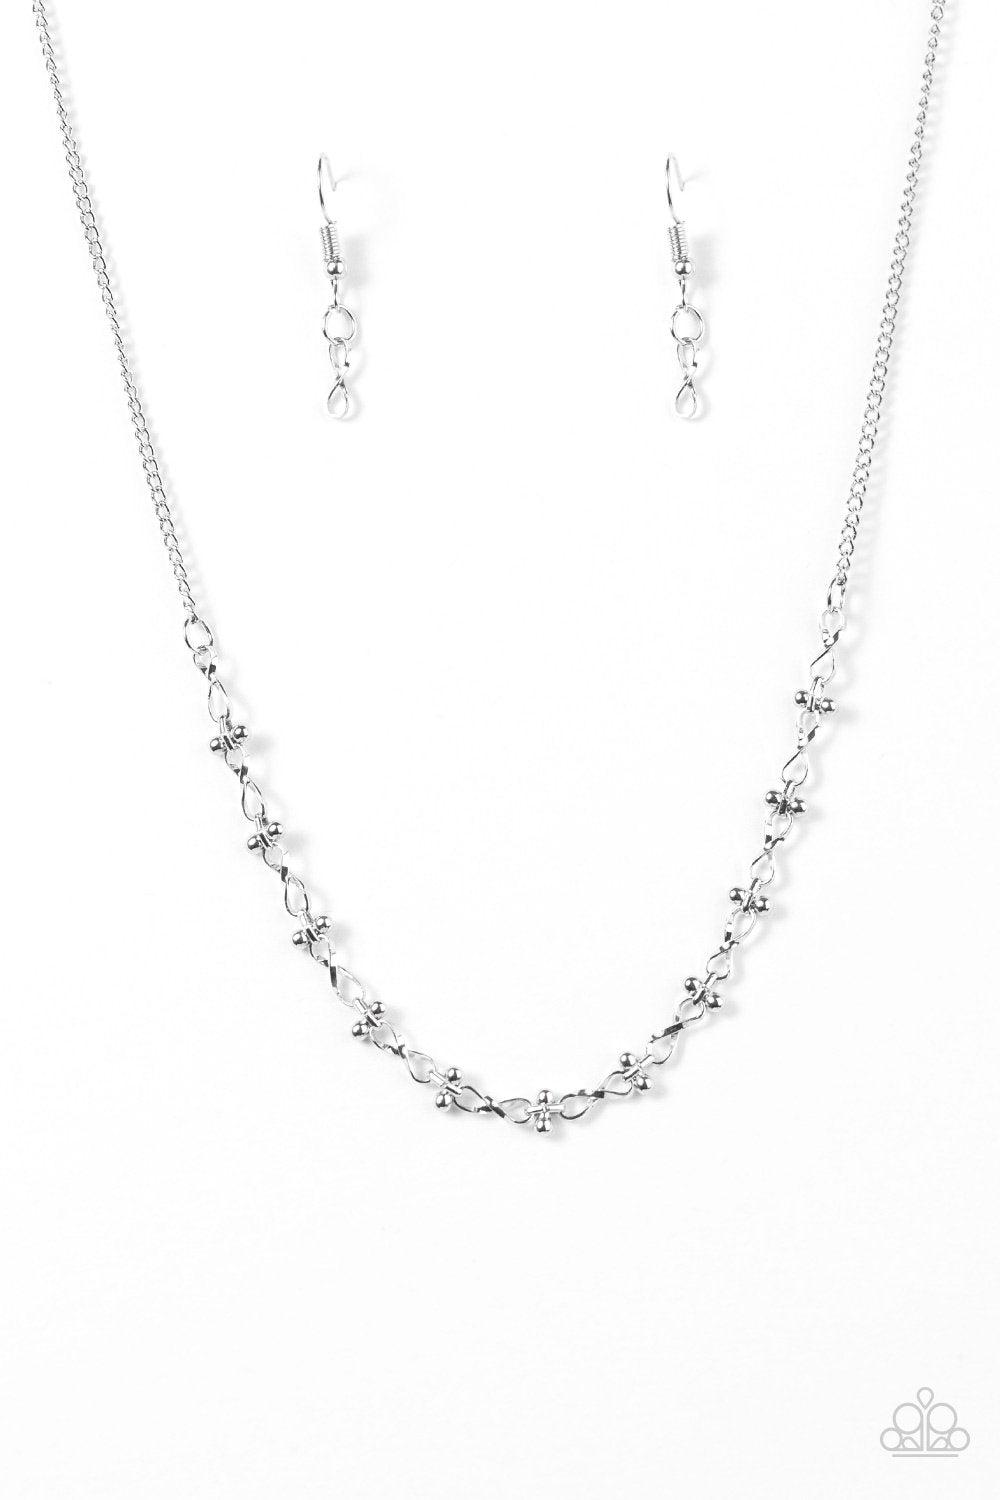 Dream a Little Dream Silver Necklace - Paparazzi Accessories-CarasShop.com - $5 Jewelry by Cara Jewels